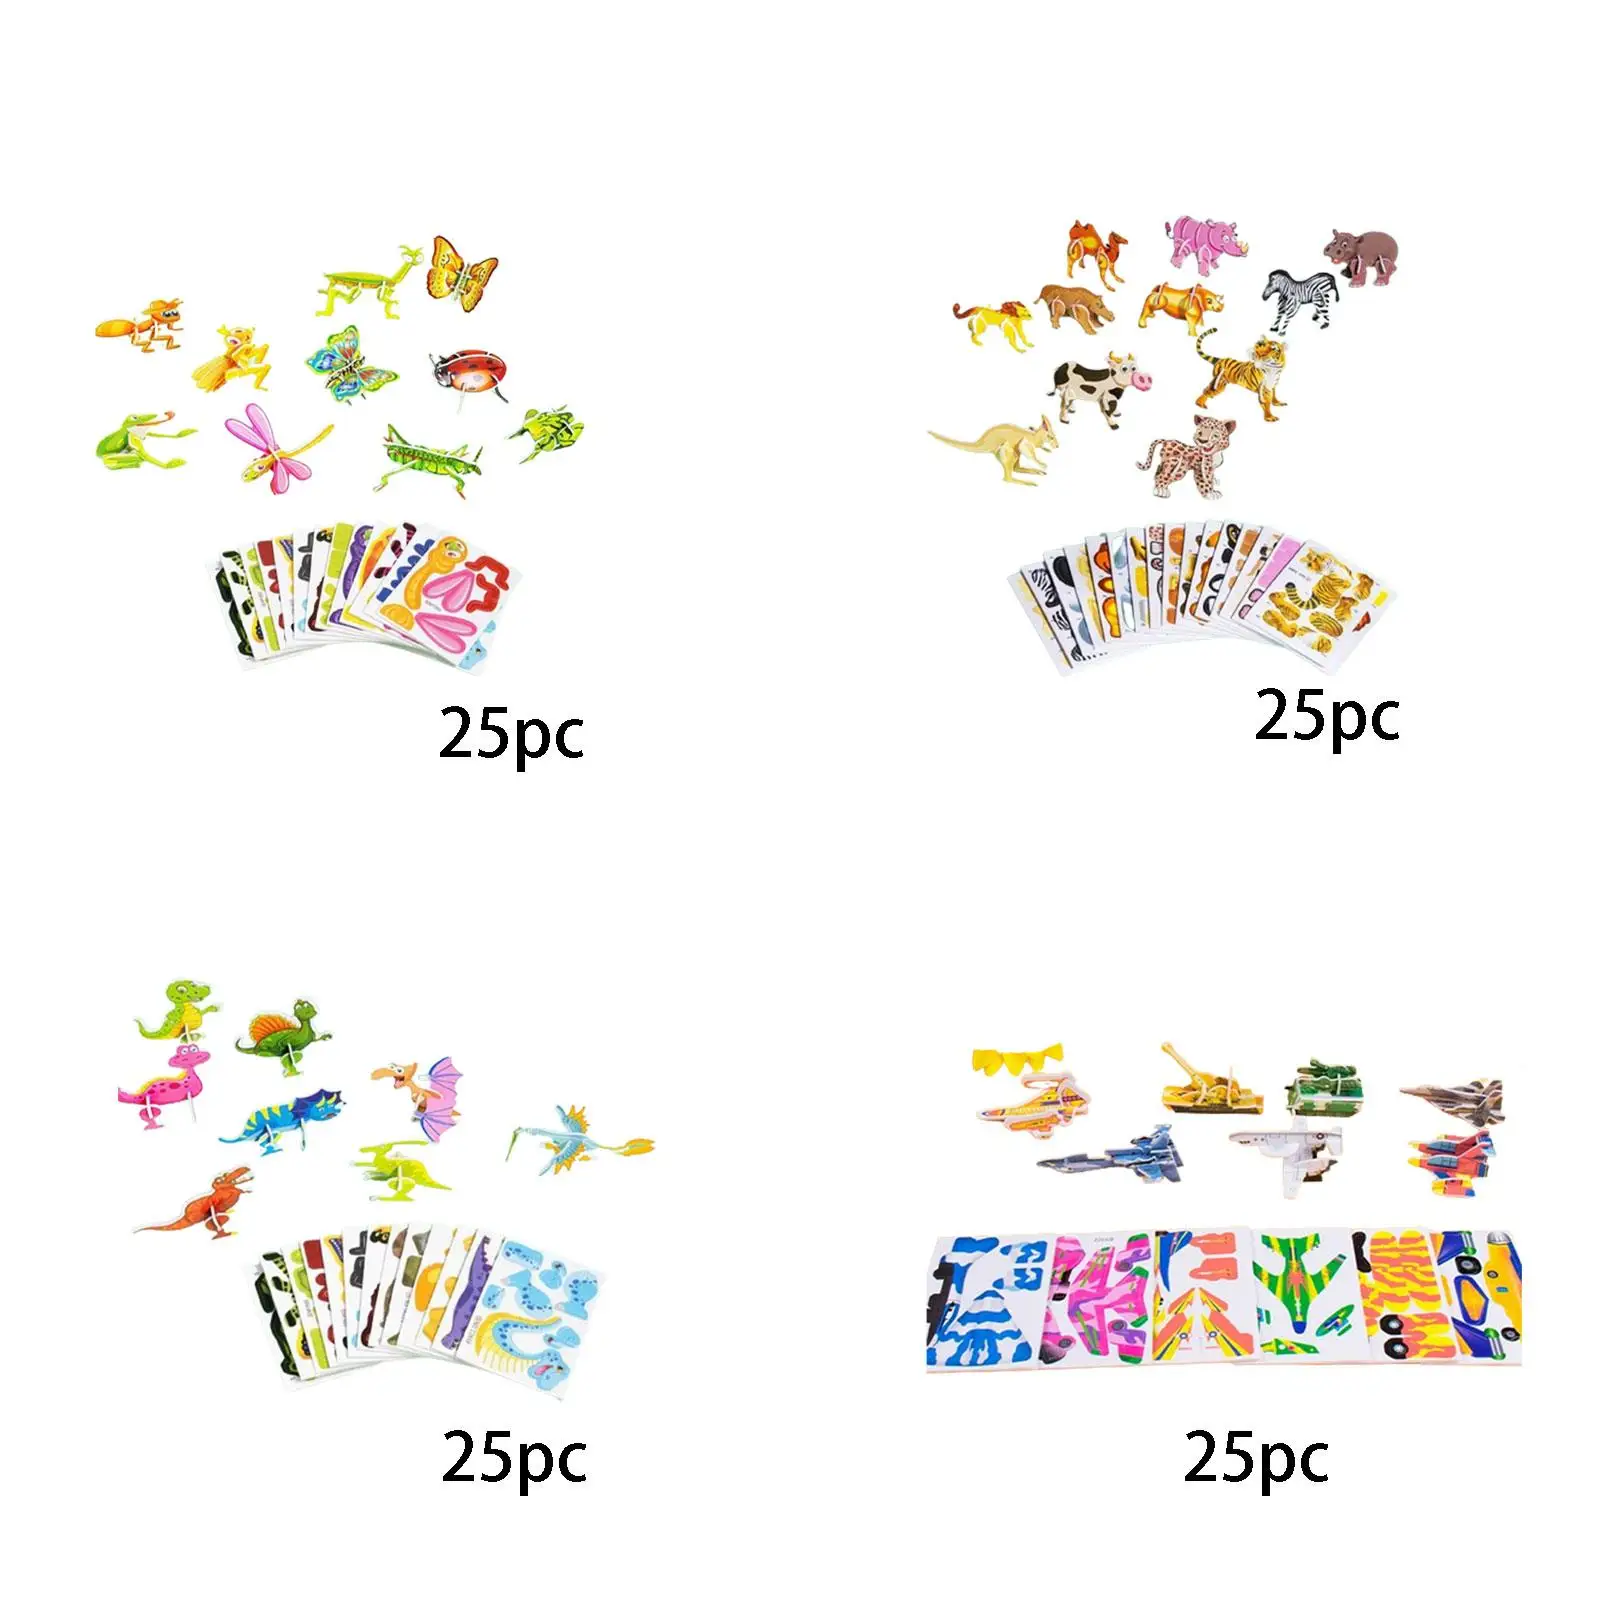 

3D Cartoon Jigsaw Puzzles Unique Gifts Ages 3+ Smooth Surface and No Burrs Preschool Learn Activities Educational Art Crafts